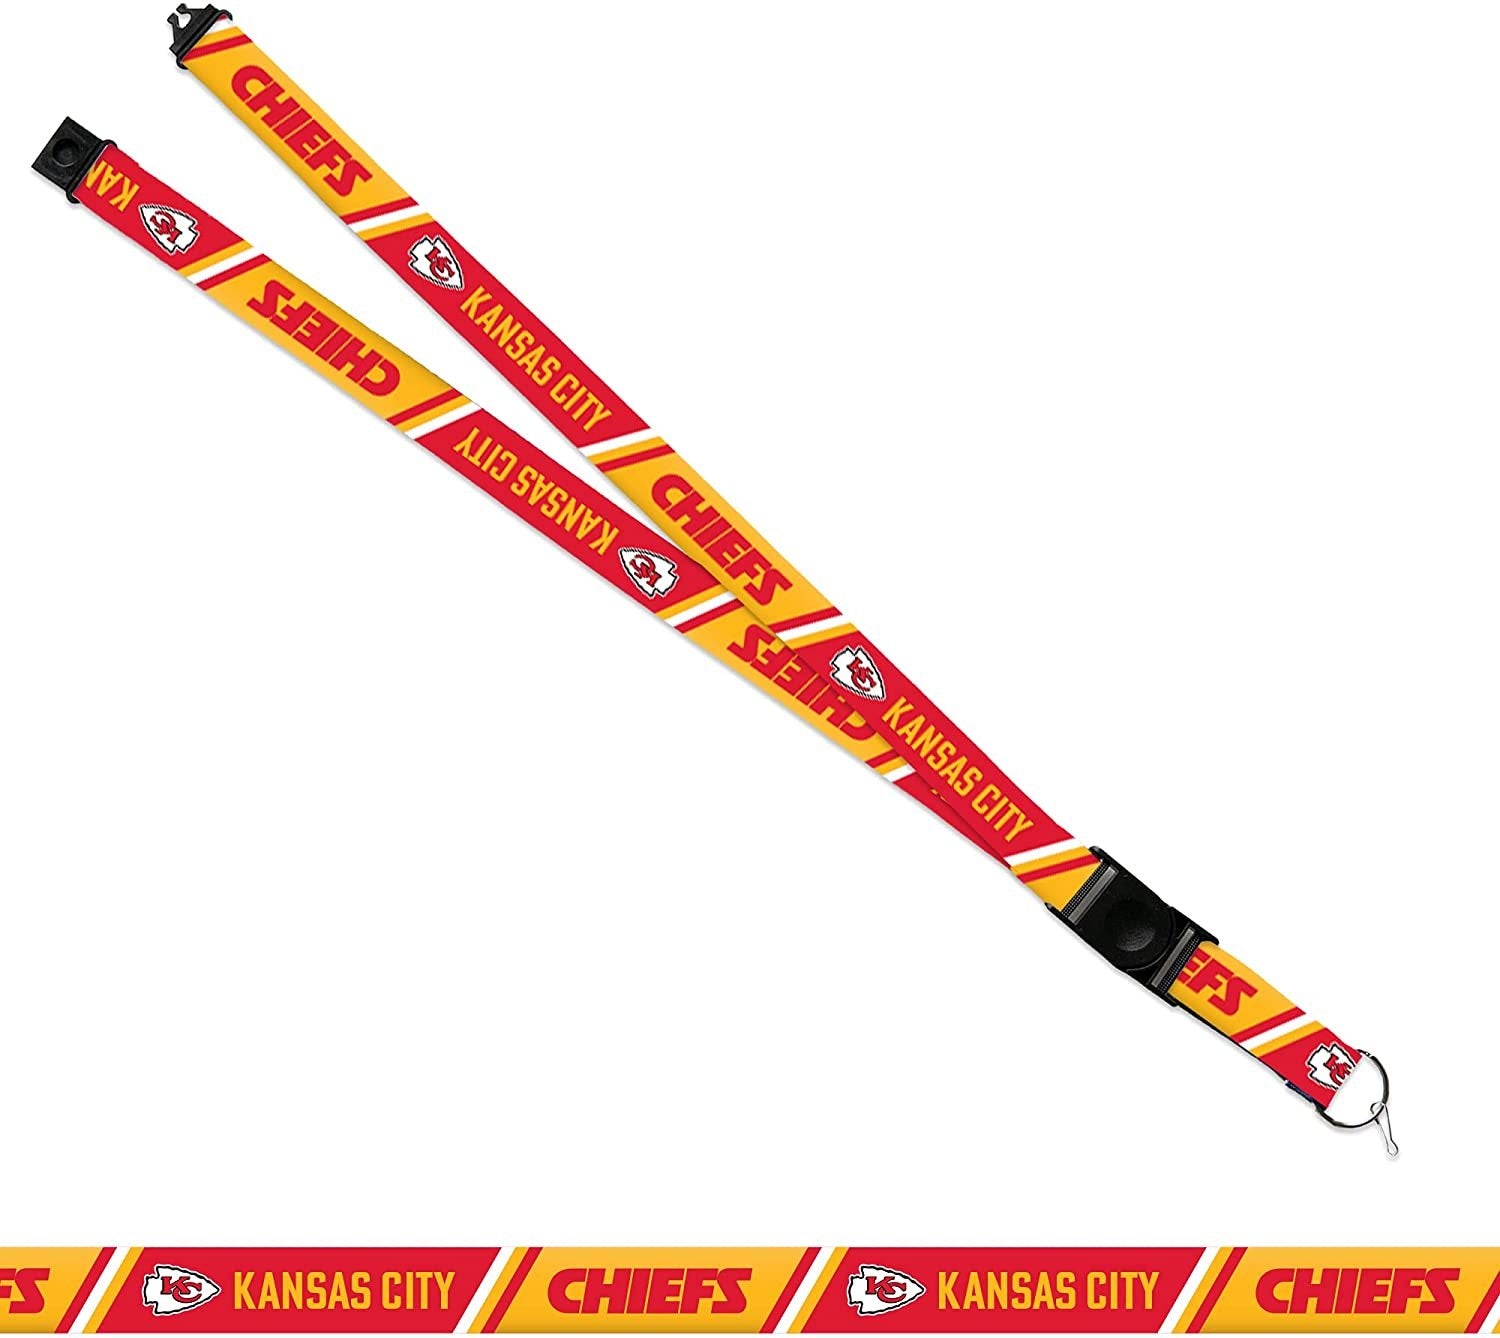 Kansas City Chiefs Lanyard Keychain Double Sided Breakaway Safety Design Adult 18 Inch